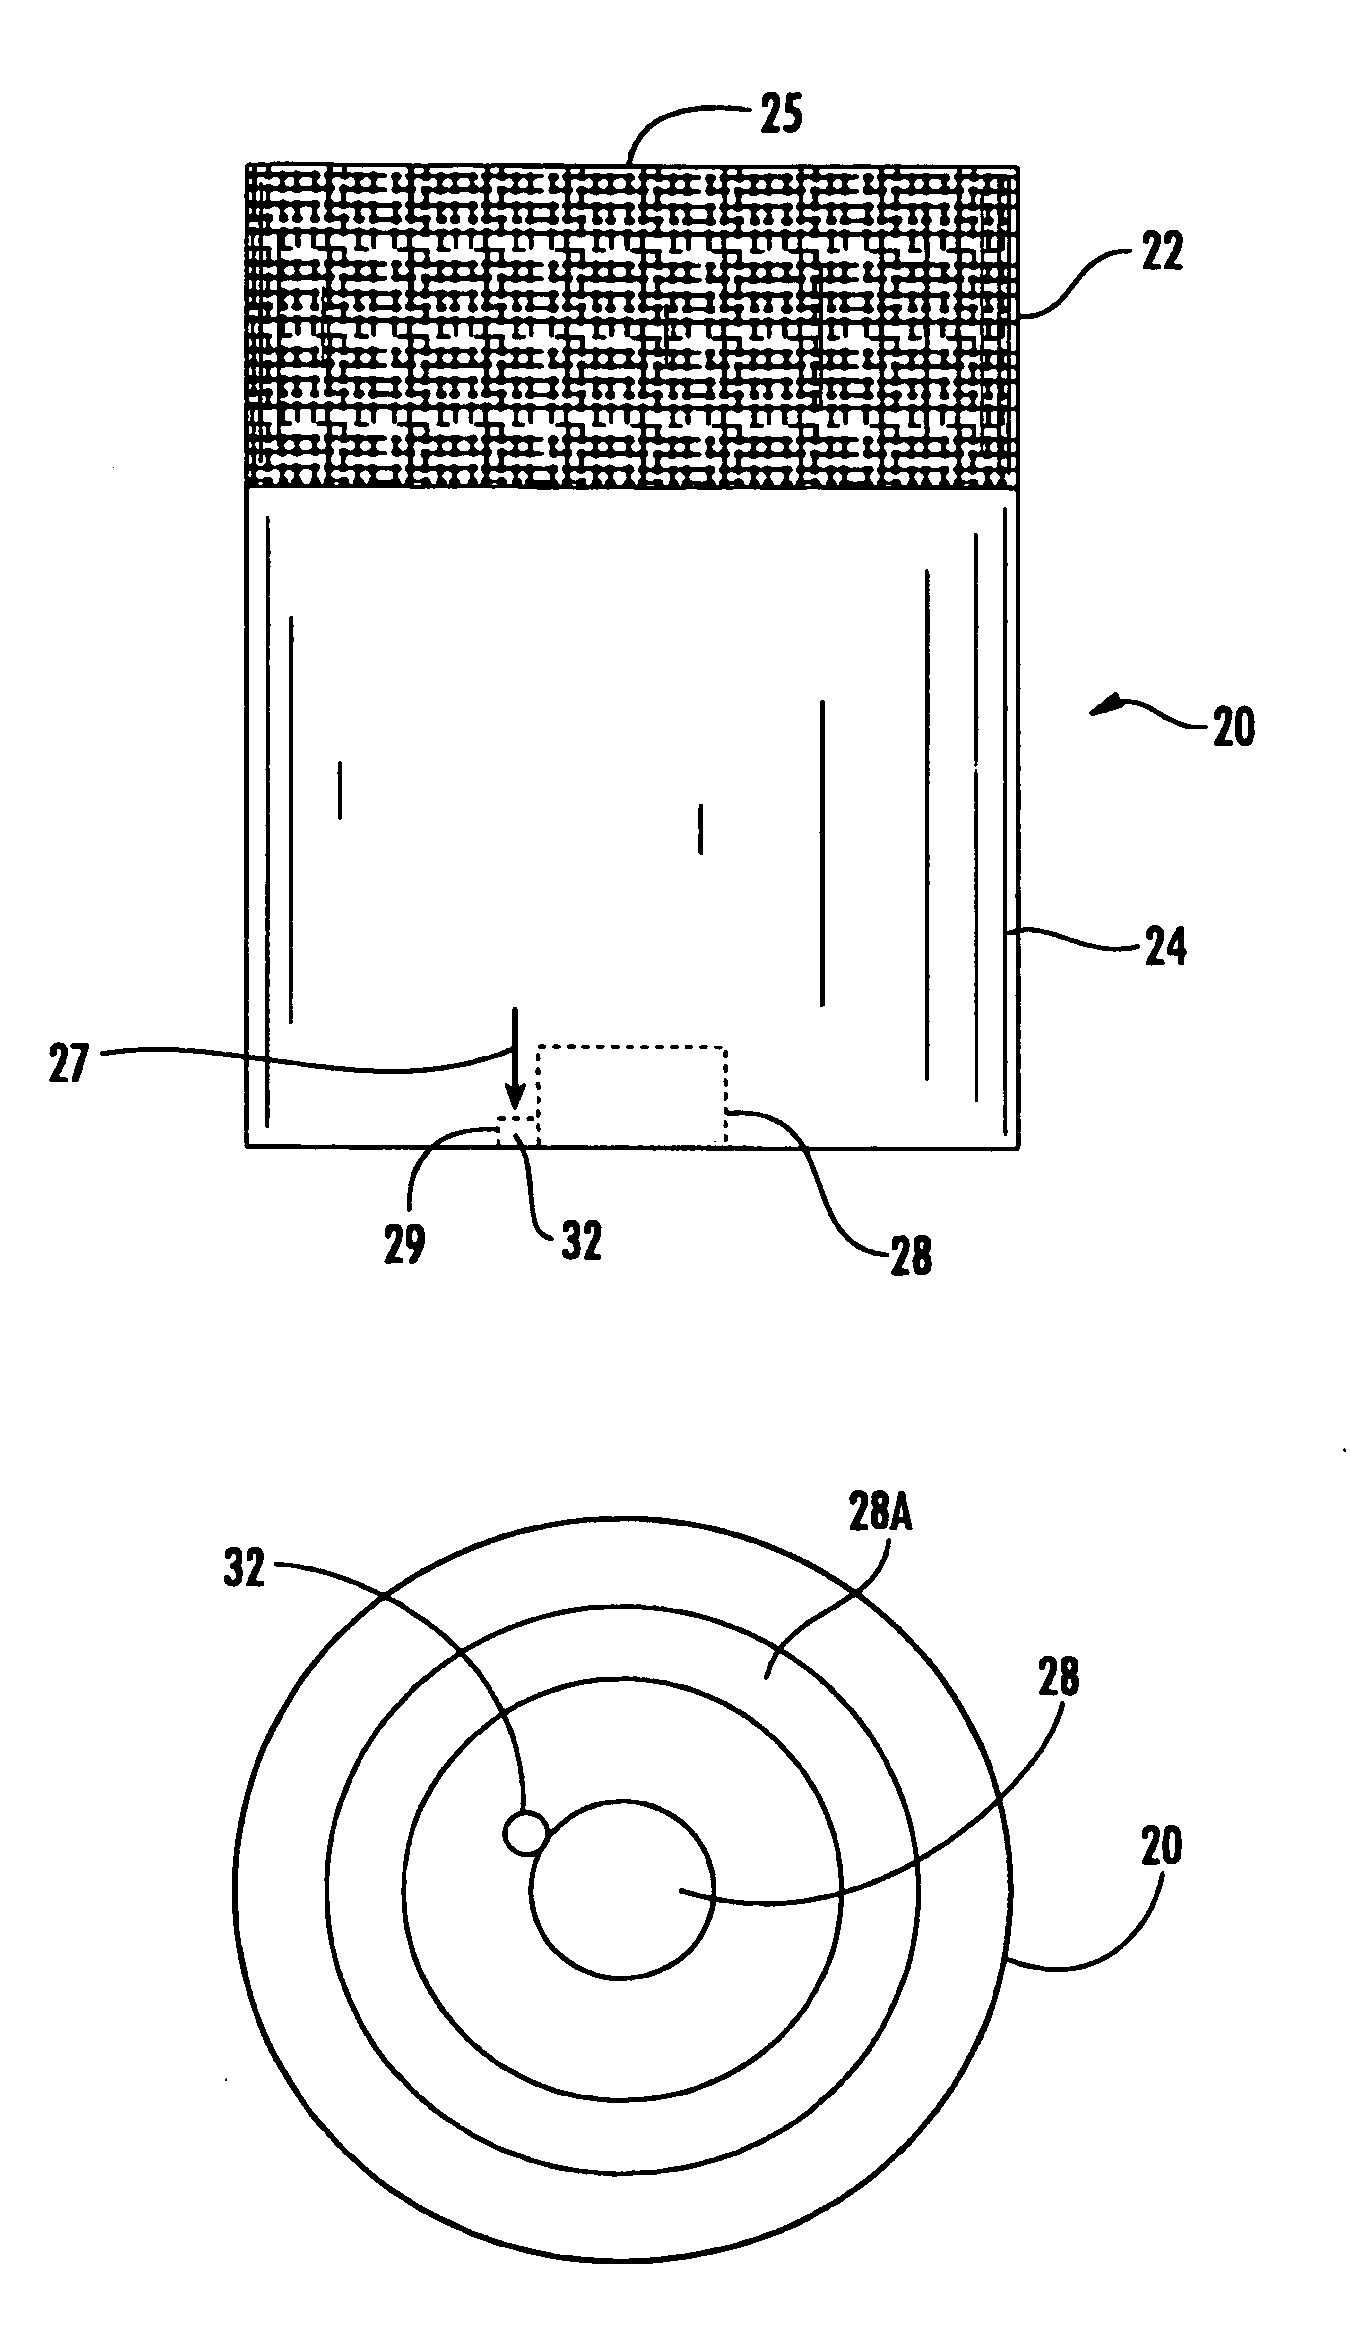 Candle with magnetically activated internal illumination